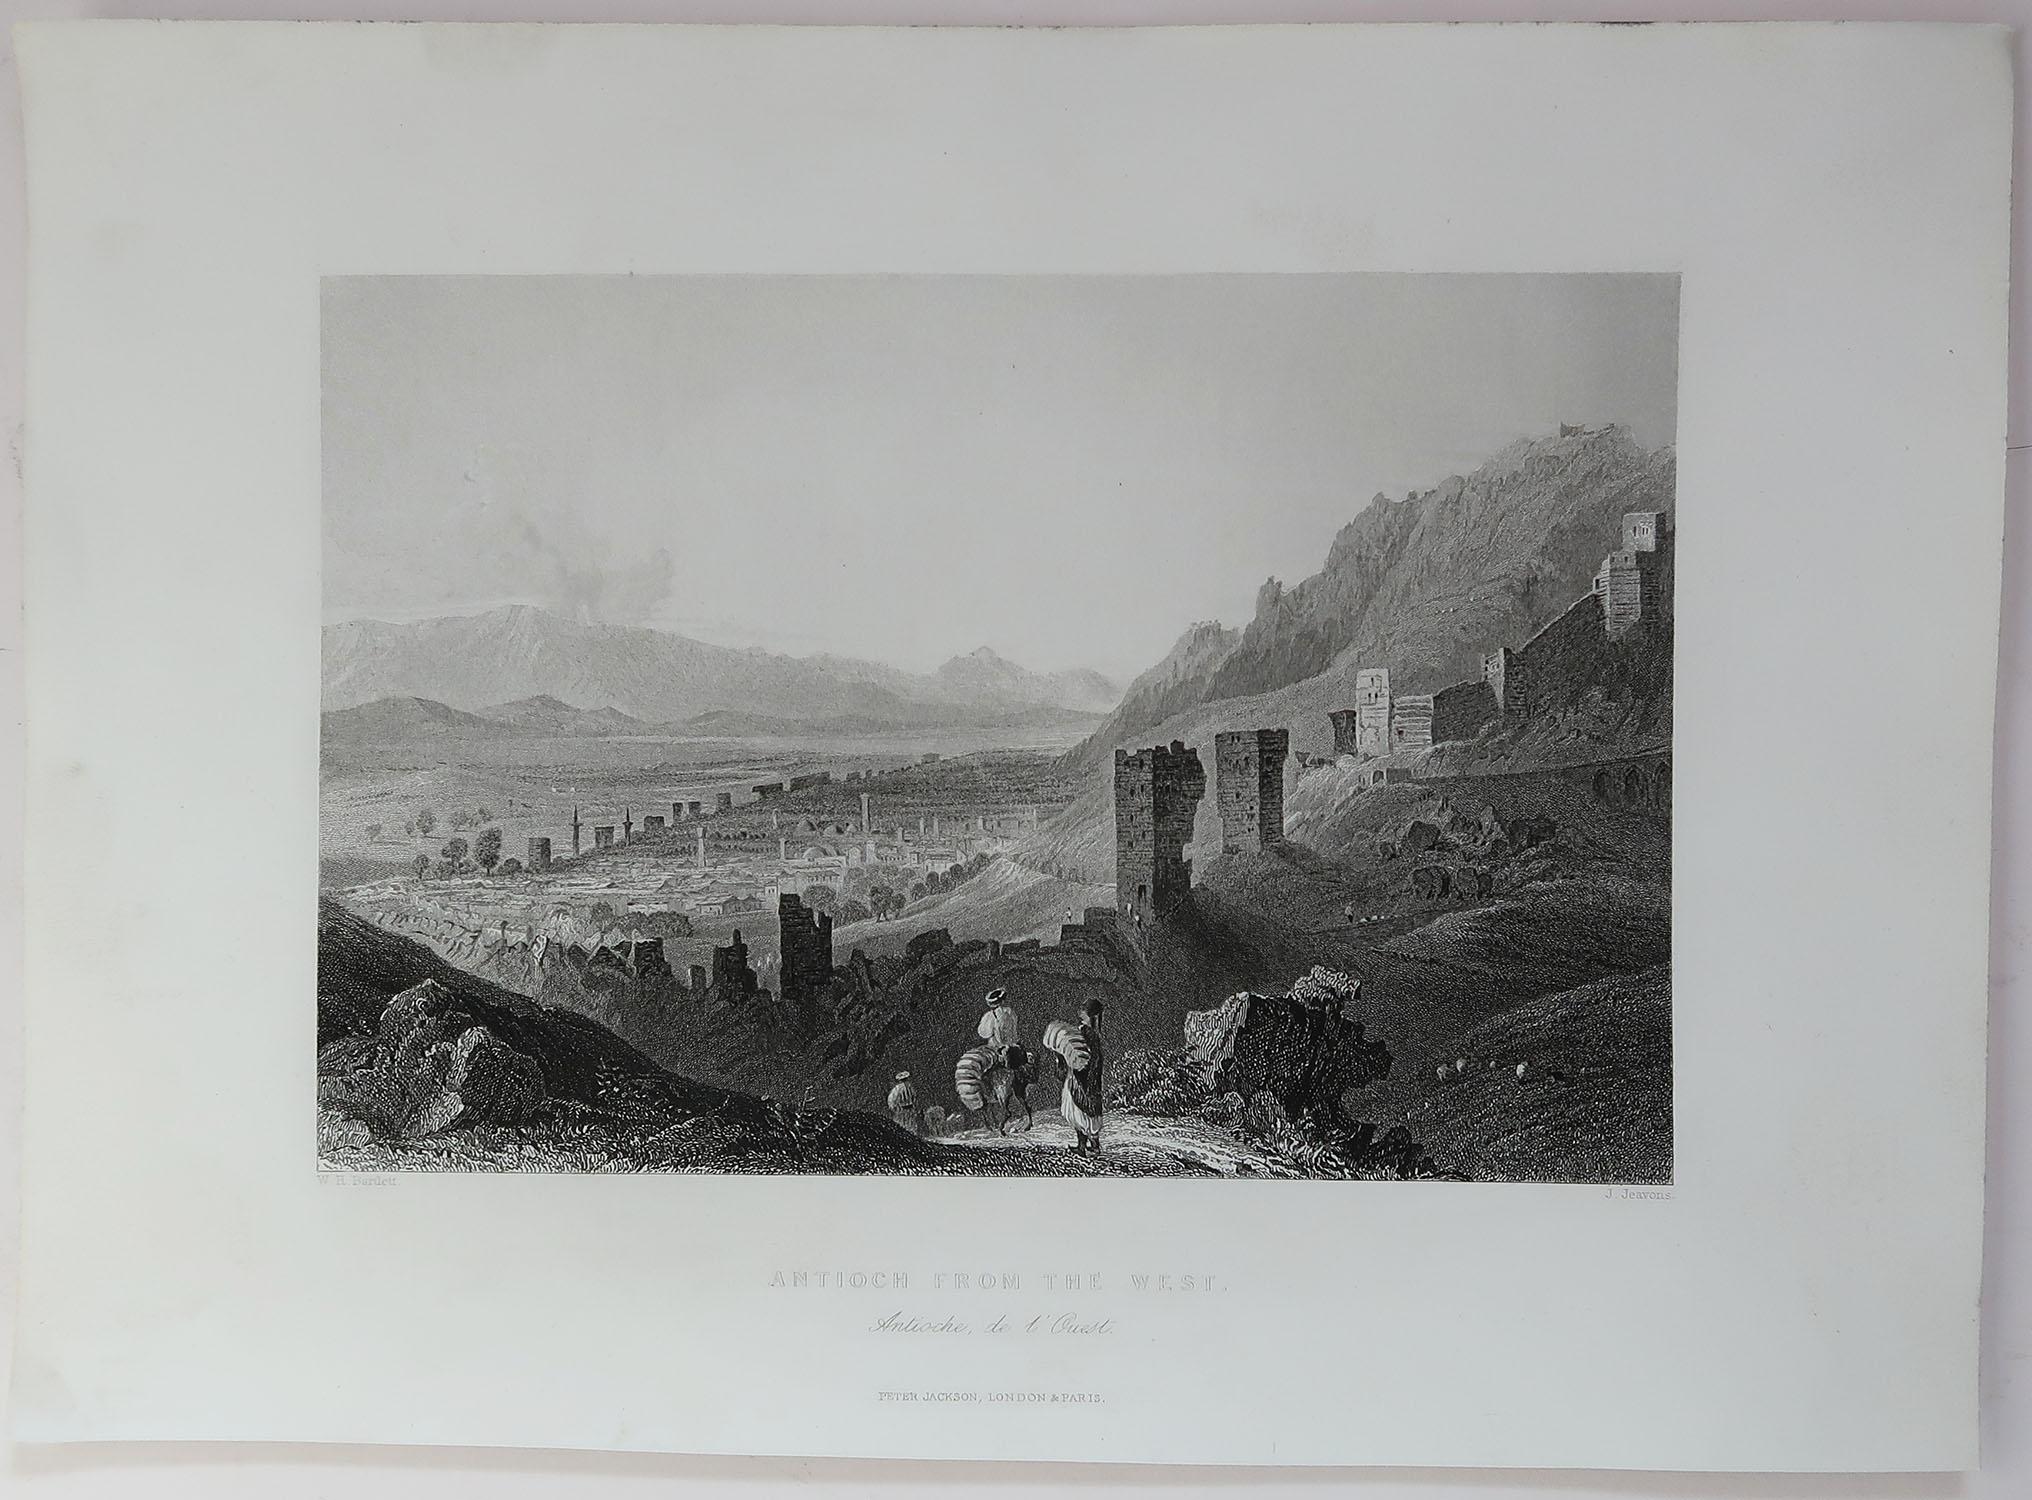 English Set of 16 Original Antique Prints of The Levant / Holy Land /Middle East, C 1840